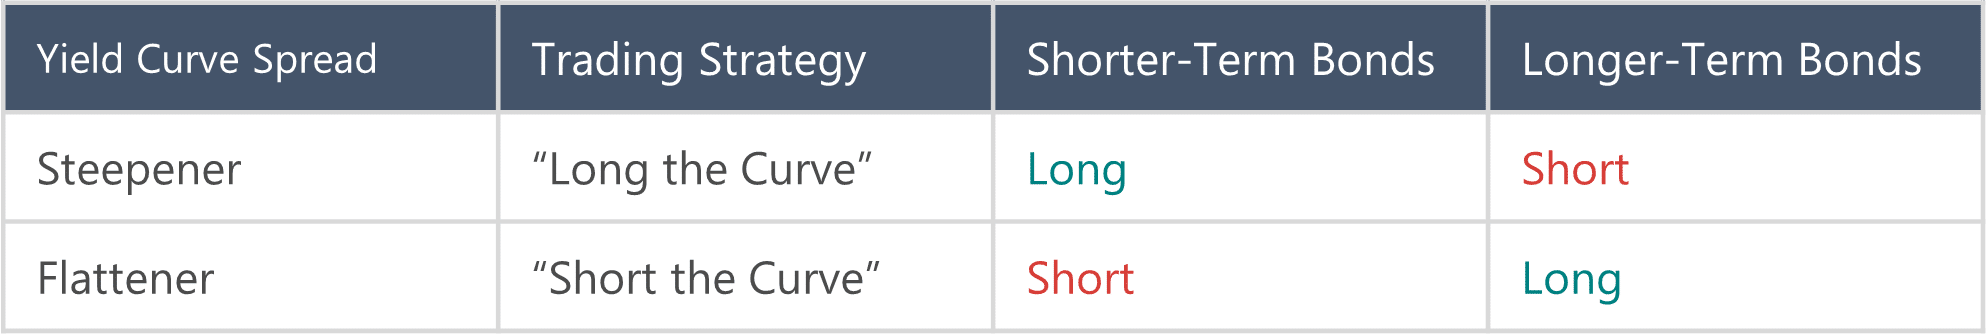 Long vs Short Positioning for Yield Curve Trades